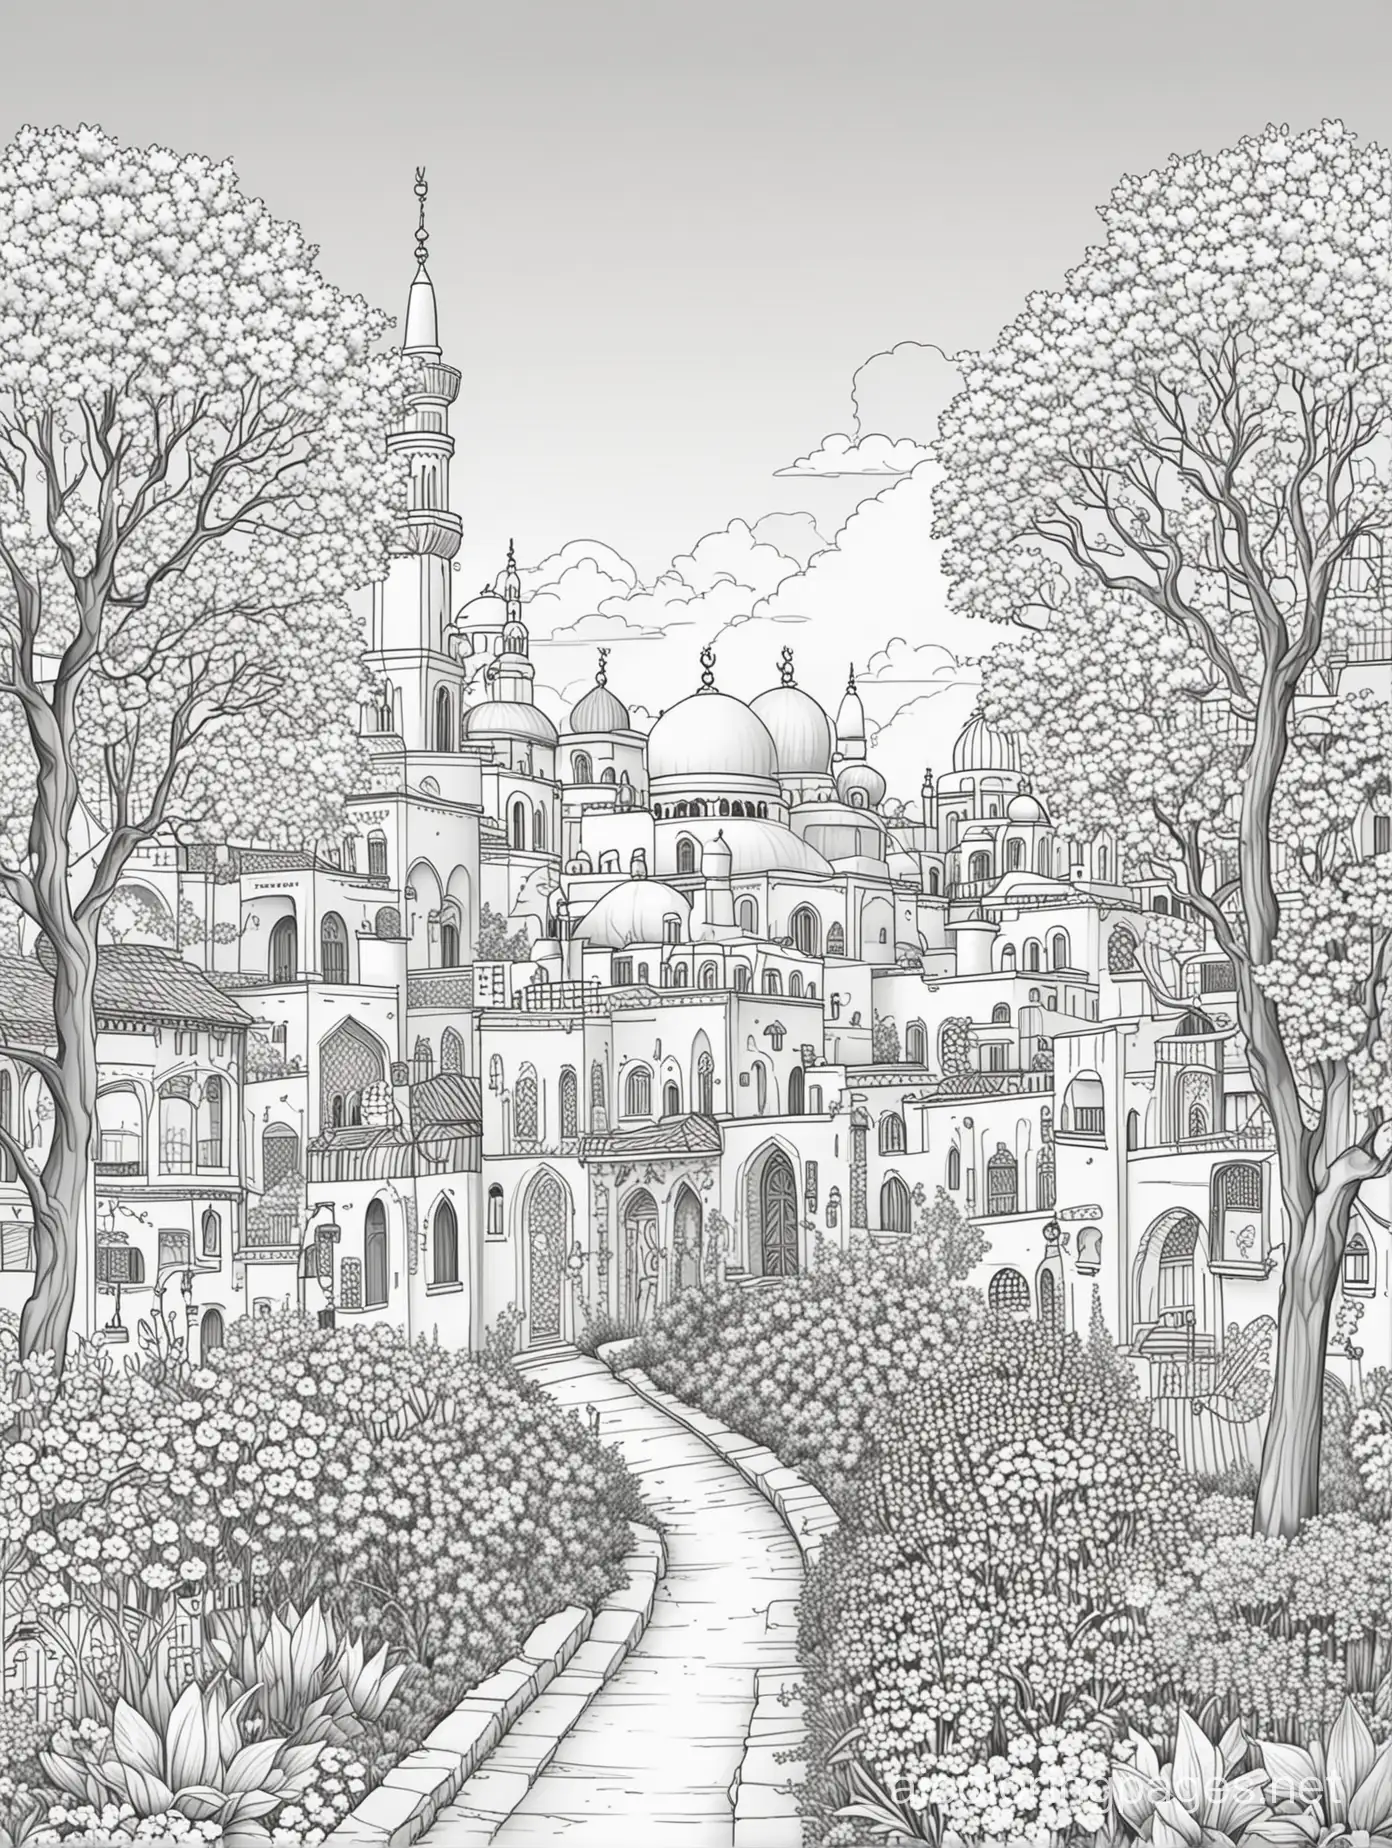 Beautiful town with houses, mosque, trees and flowers, Coloring Page, black and white, line art, white background, Simplicity, Ample White Space. The background of the coloring page is plain white to make it easy for young children to color within the lines. The outlines of all the subjects are easy to distinguish, making it simple for kids to color without too much difficulty